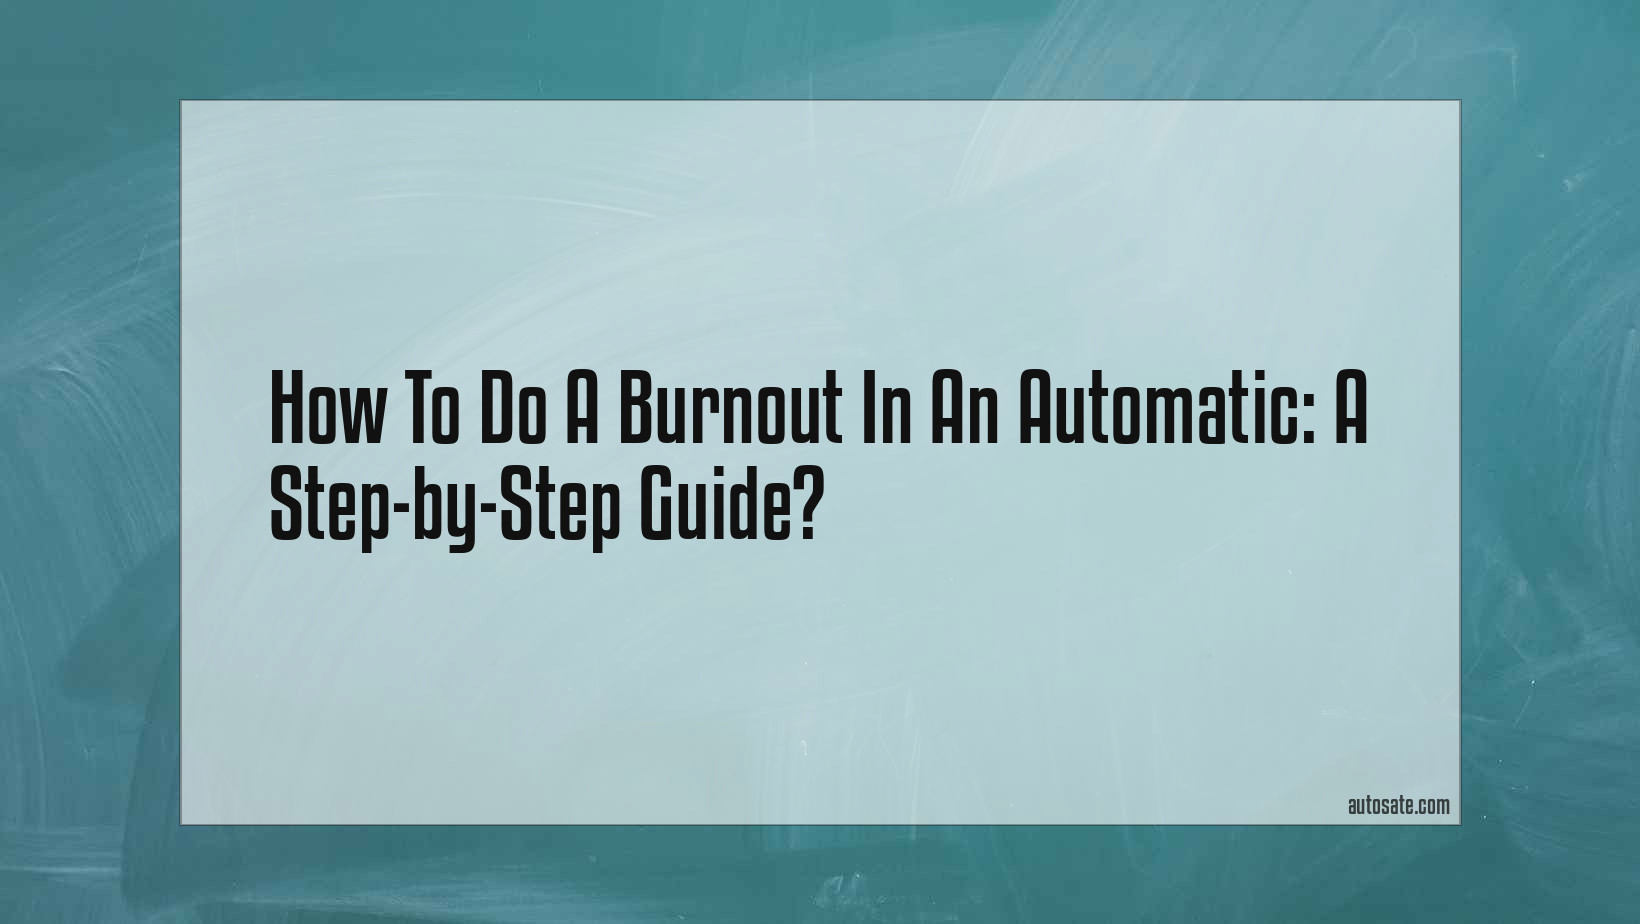 How To Do A Burnout In An Automatic: A Step-By-Step Guide